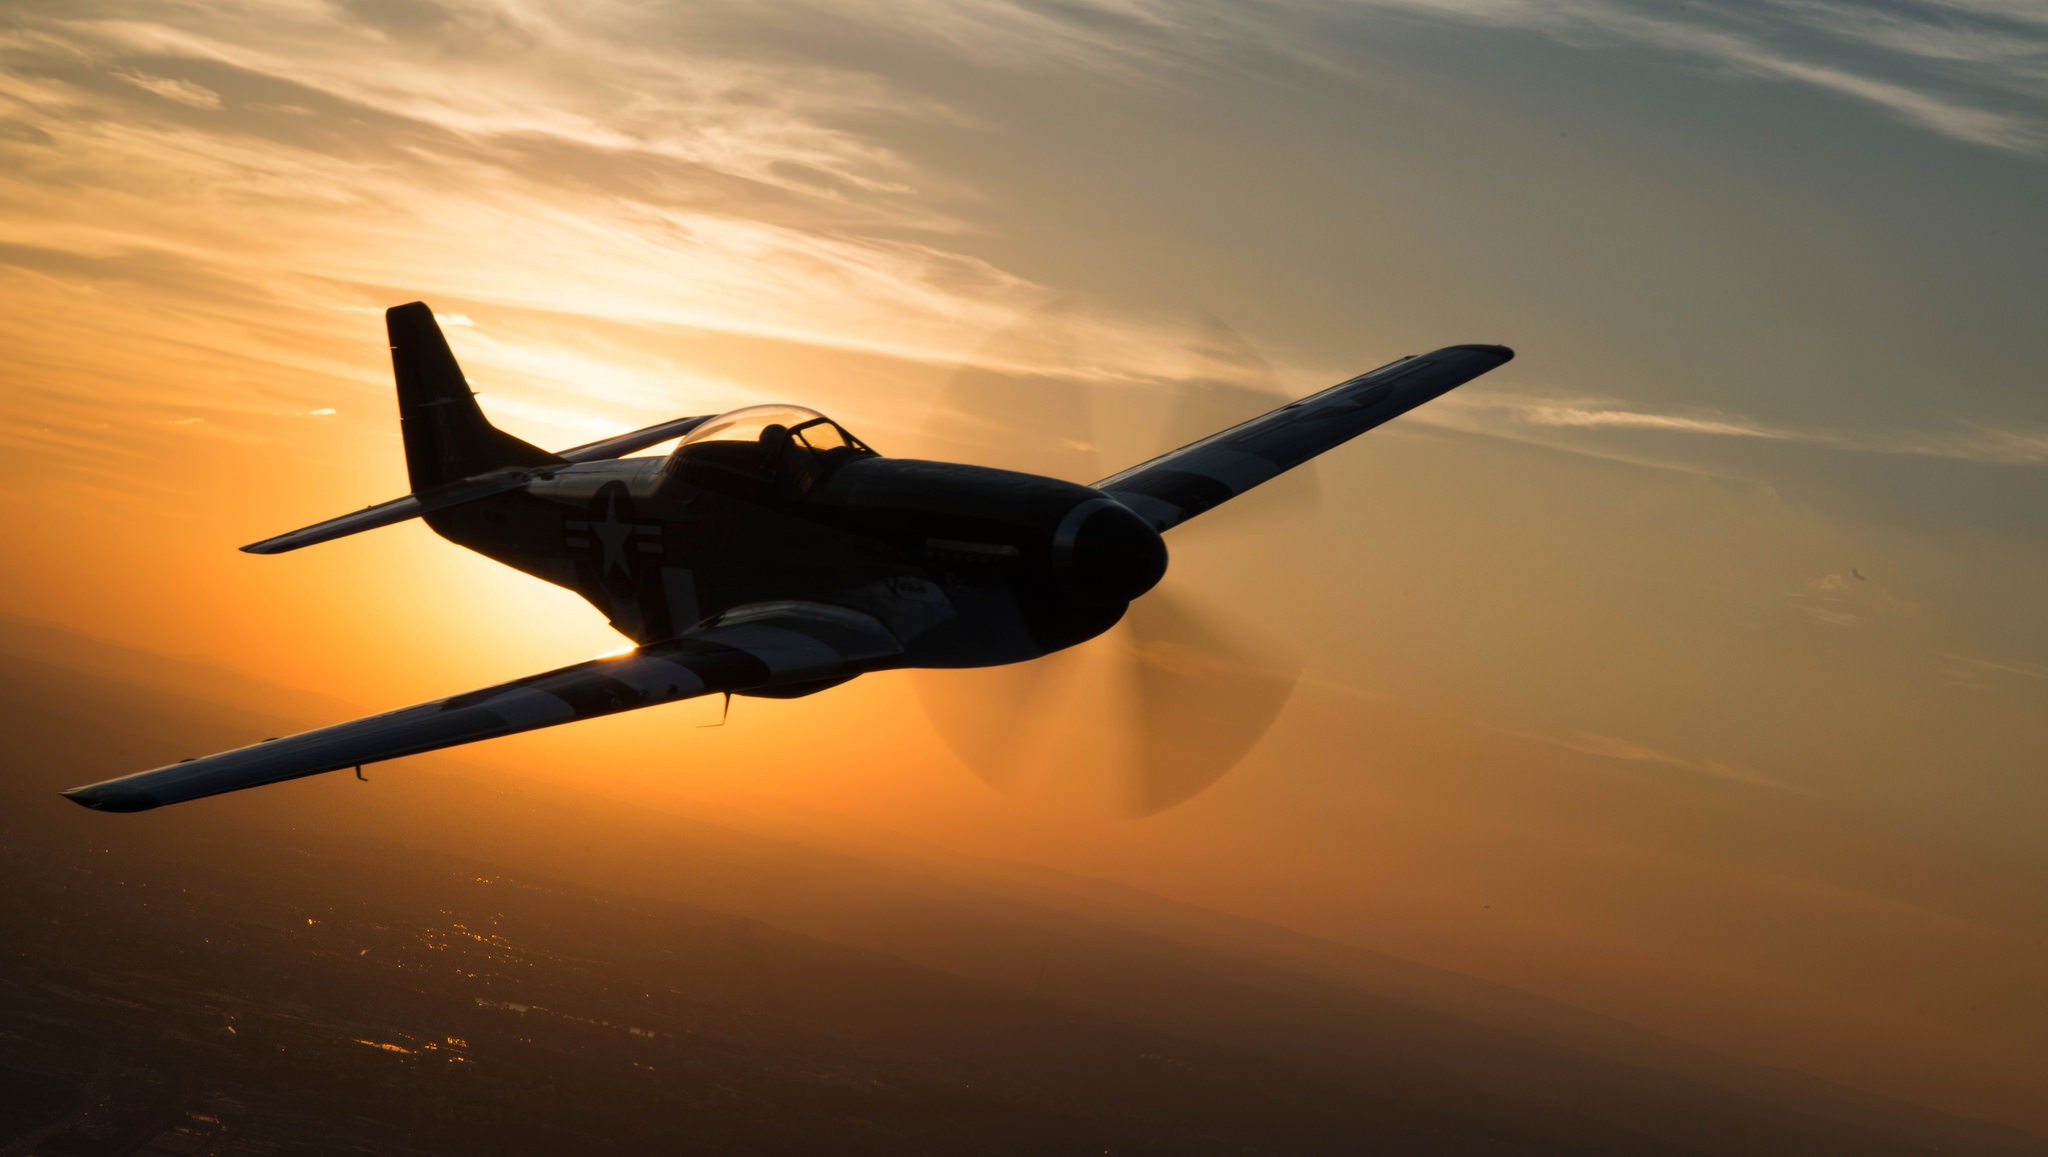 military aircraft, Aircraft, Sunset, Silhouette, North American P 51 Mustang Wallpaper